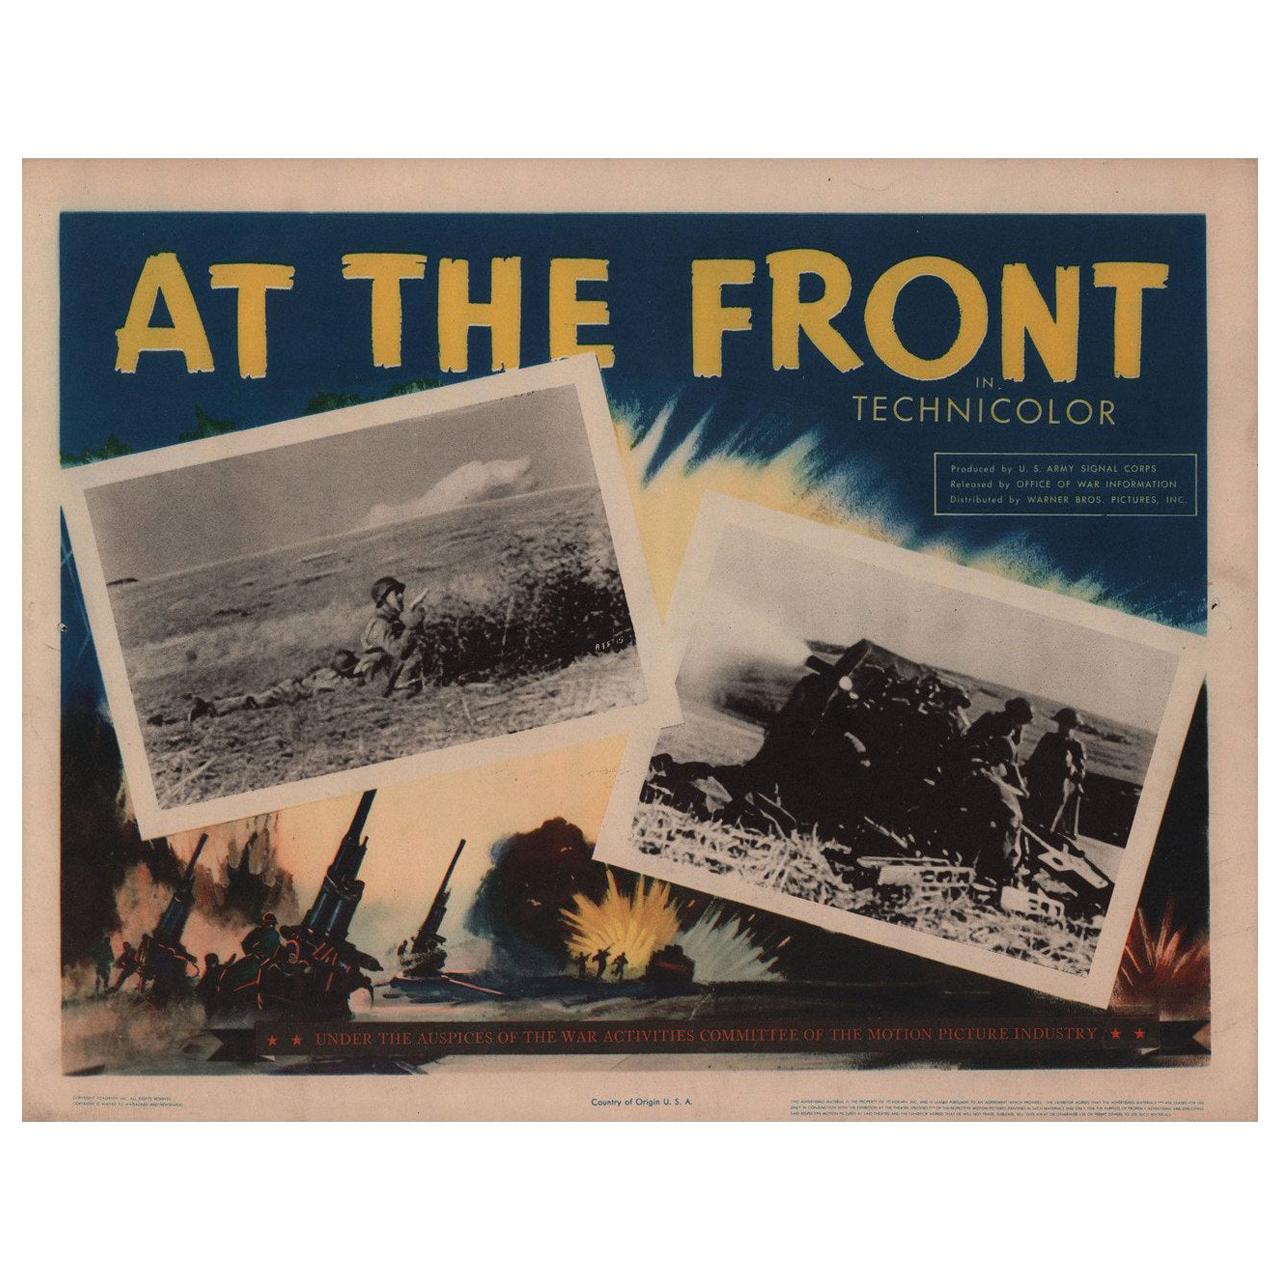 At the Front 1944 U.S. Scene Card